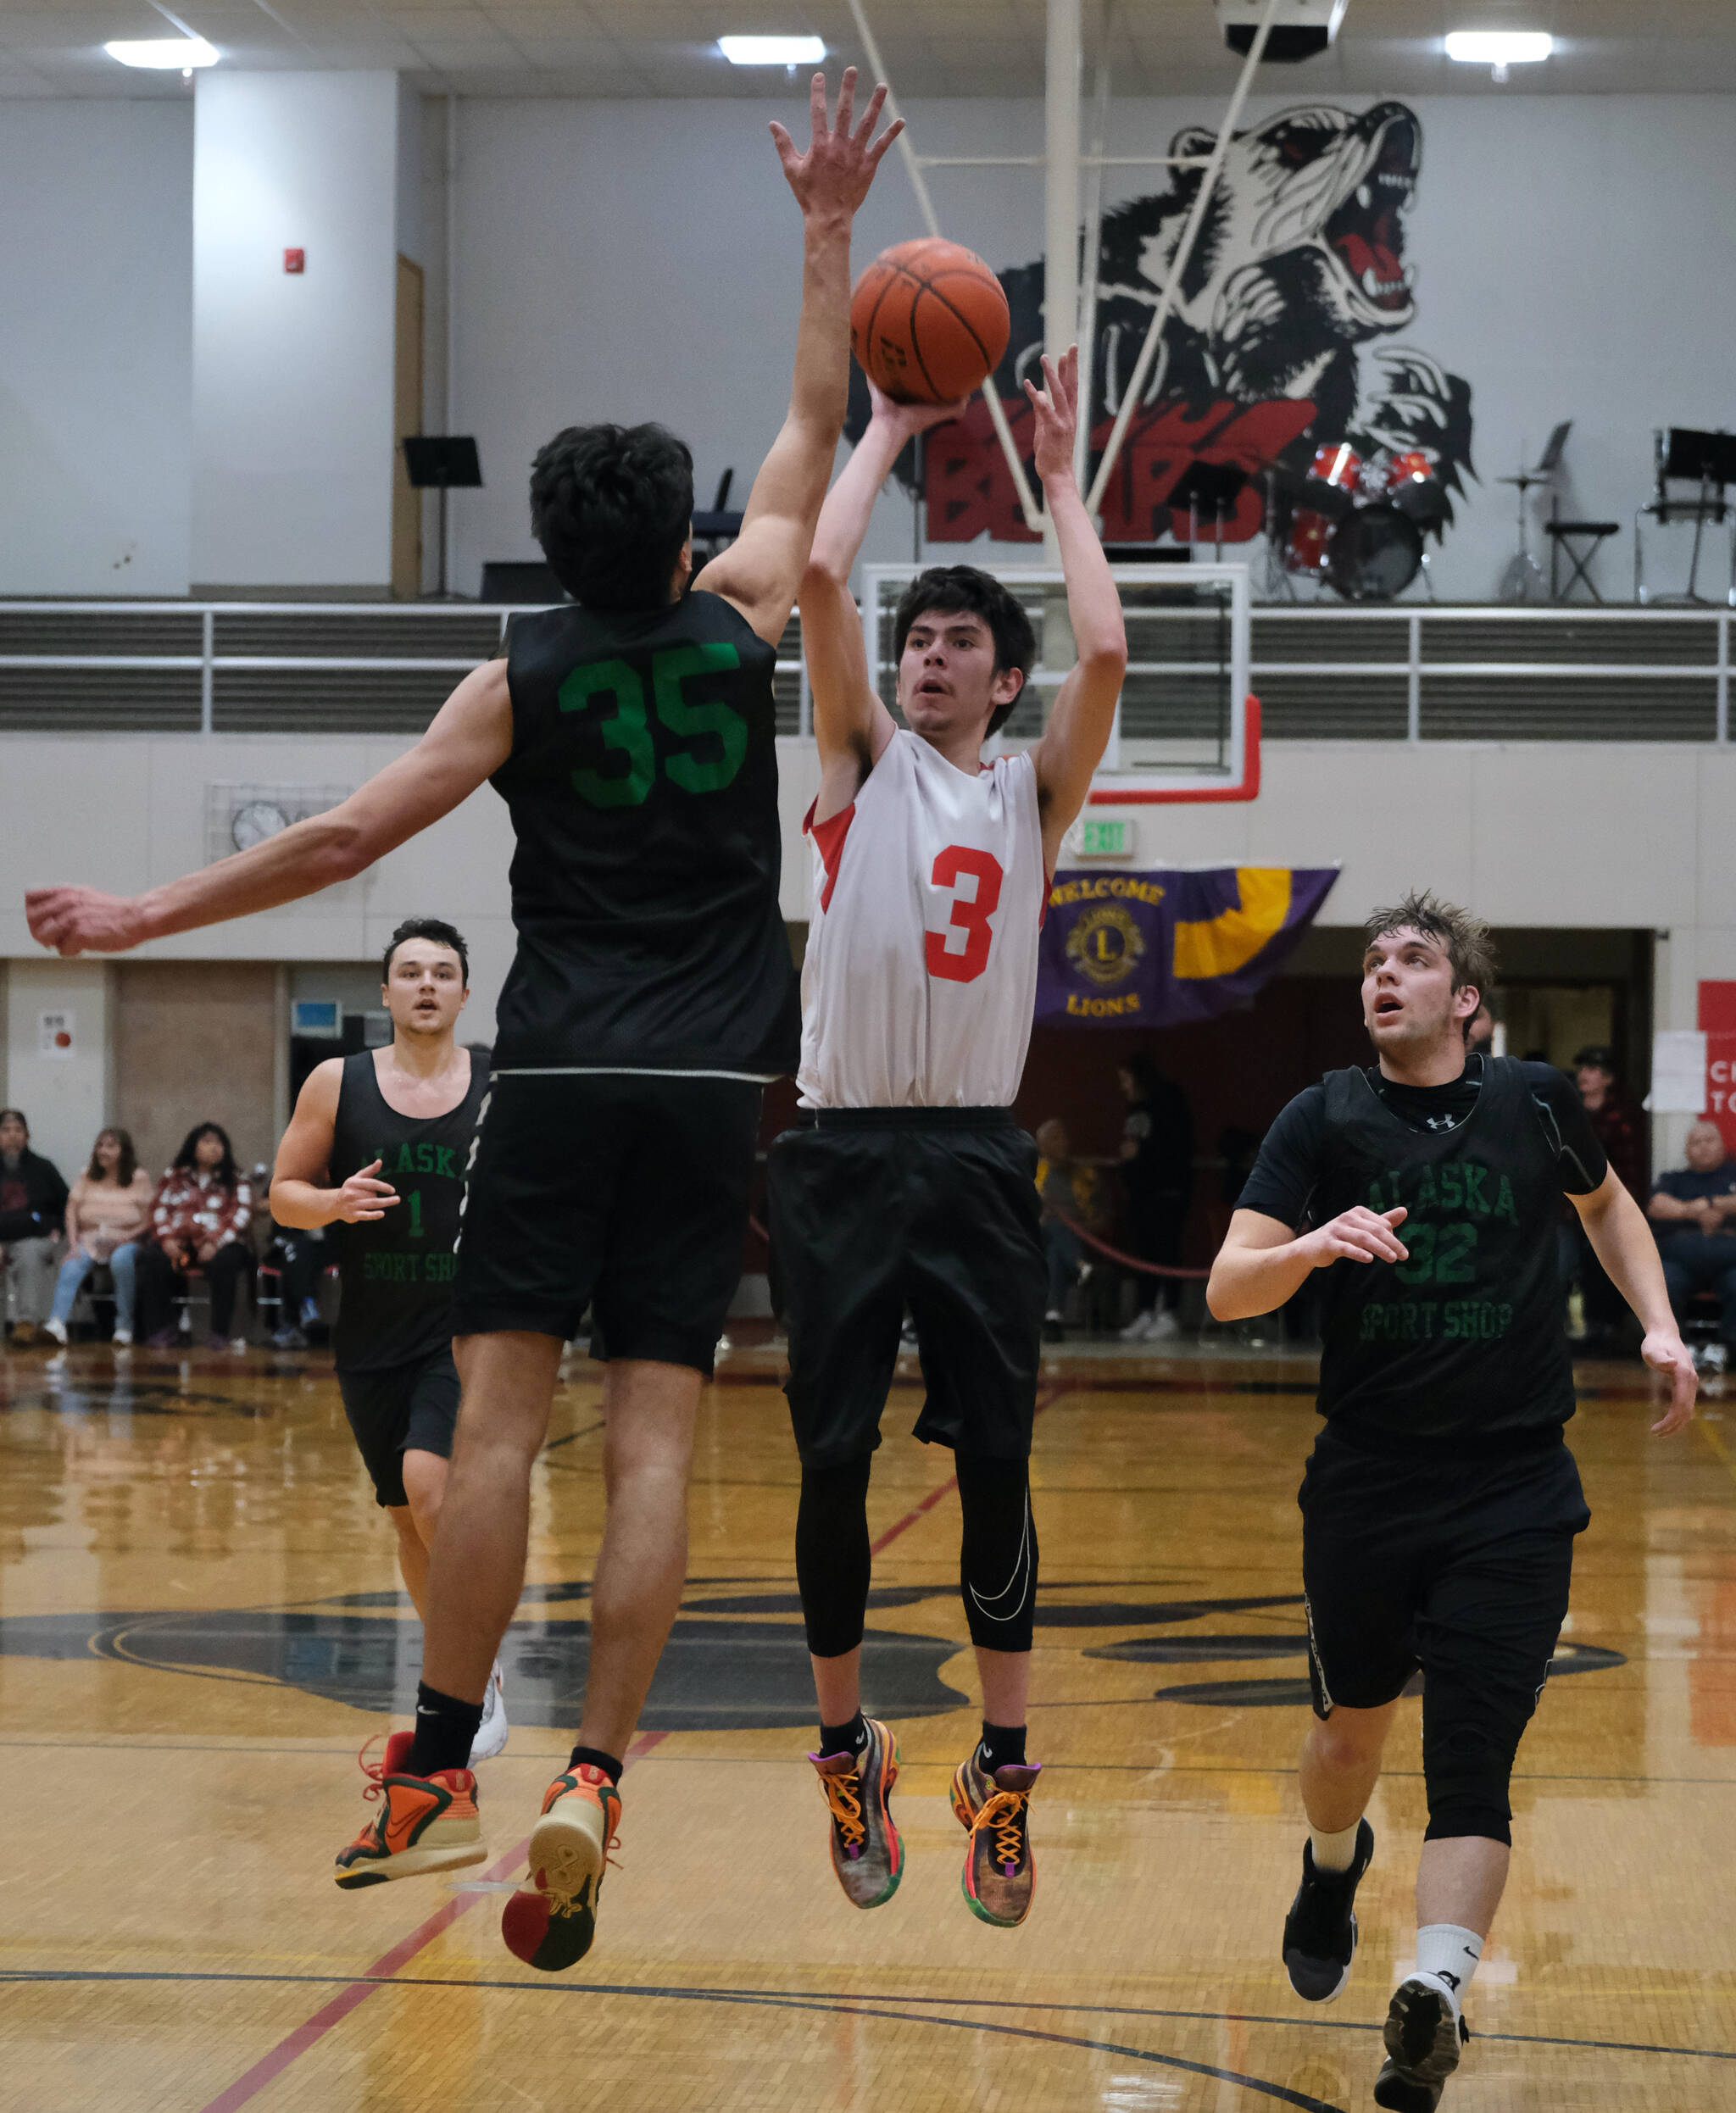 Kake’s Shawn Merry (3) is defended by Haines’ Kirby Faverty (35) as Haines’ Kai Sato-Franks (1) and Dylan Swinton (32) look on during the Gold Medal tournament, Wednesday, March 22, at Juneau-Douglas High School: Yadaa.at Kalé. (Klas Stolpe/For the Juneau Empire)